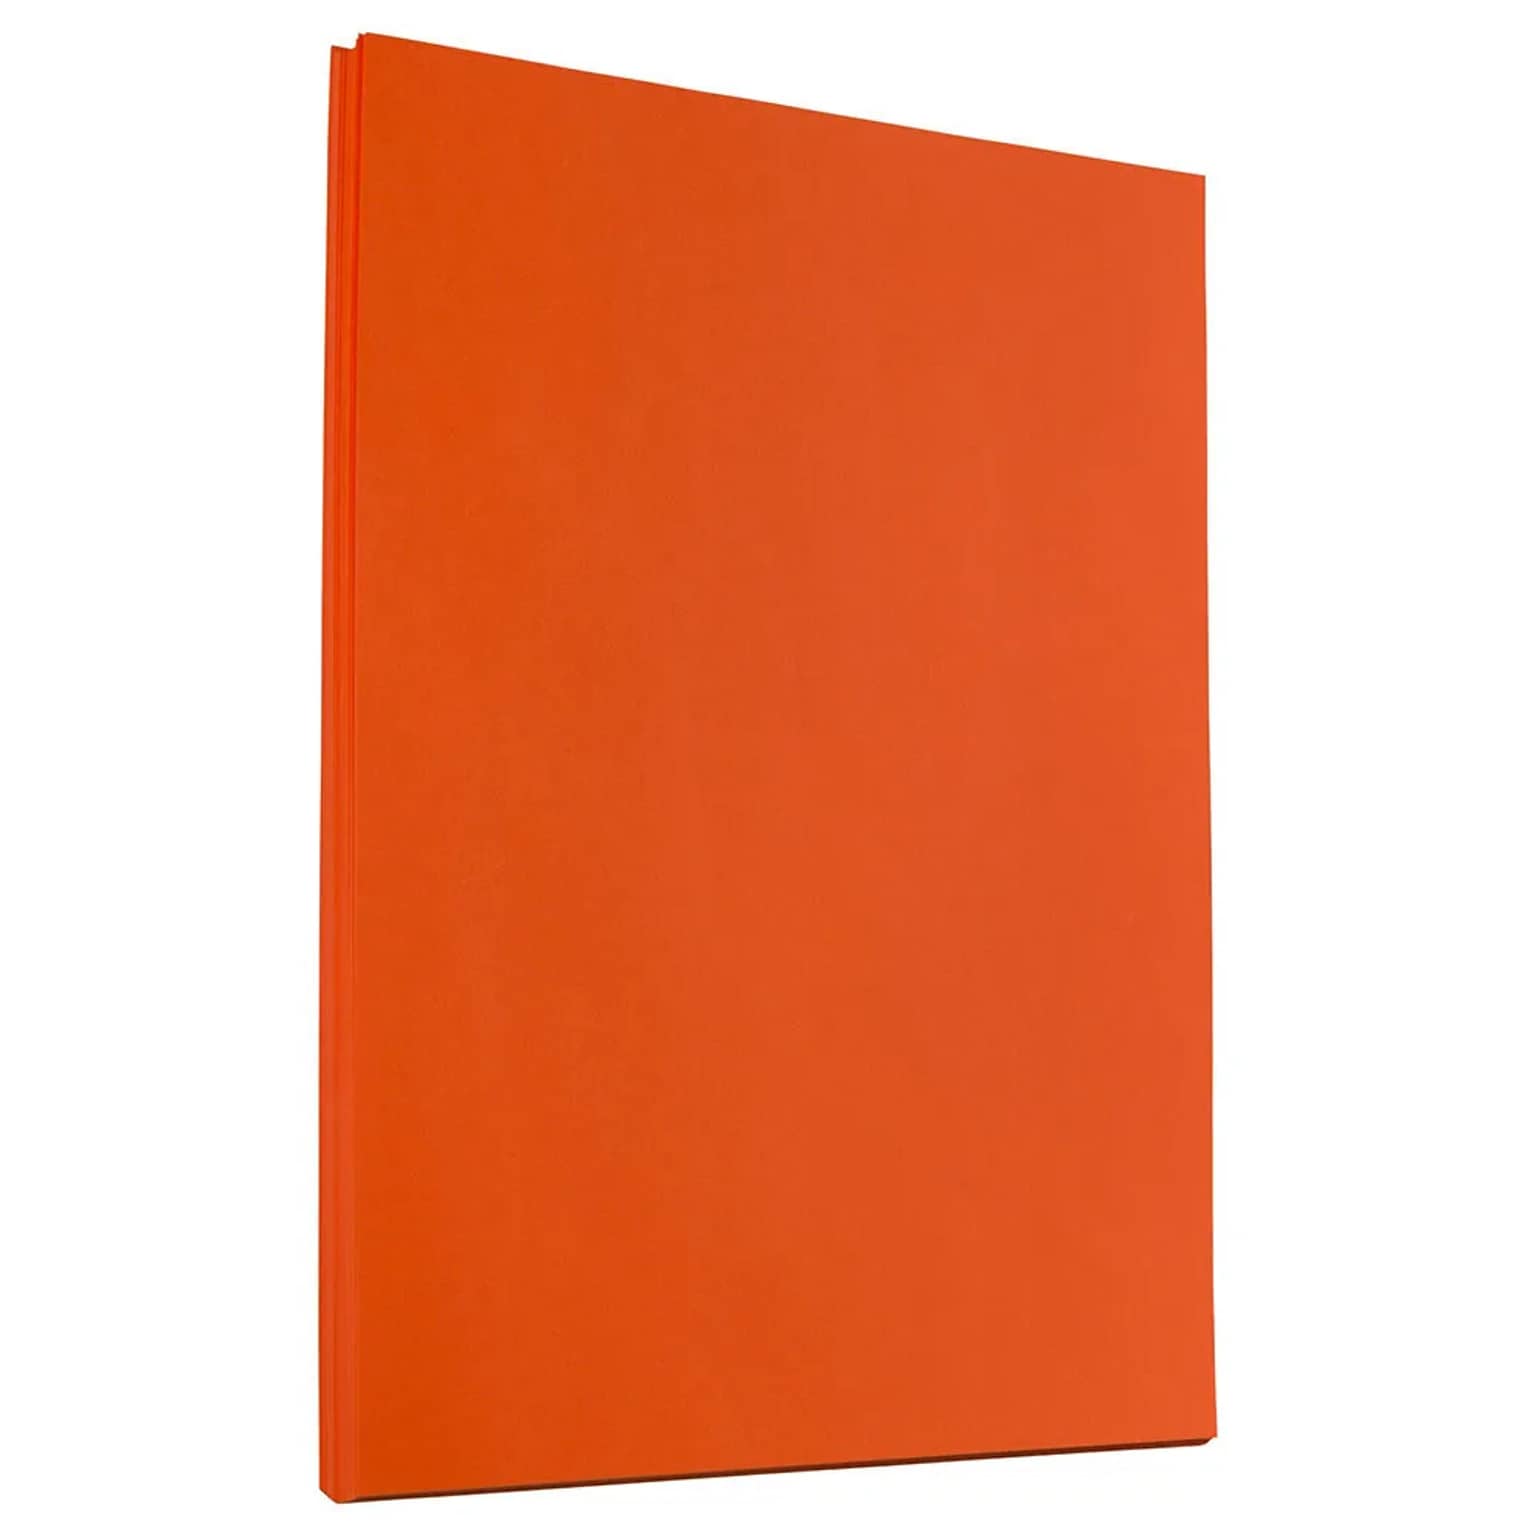 JAM Paper 30% Recycled Smooth Colored Paper, 24 lbs., 8.5 x 11, Orange, 50 Sheets/Pack (103655A)